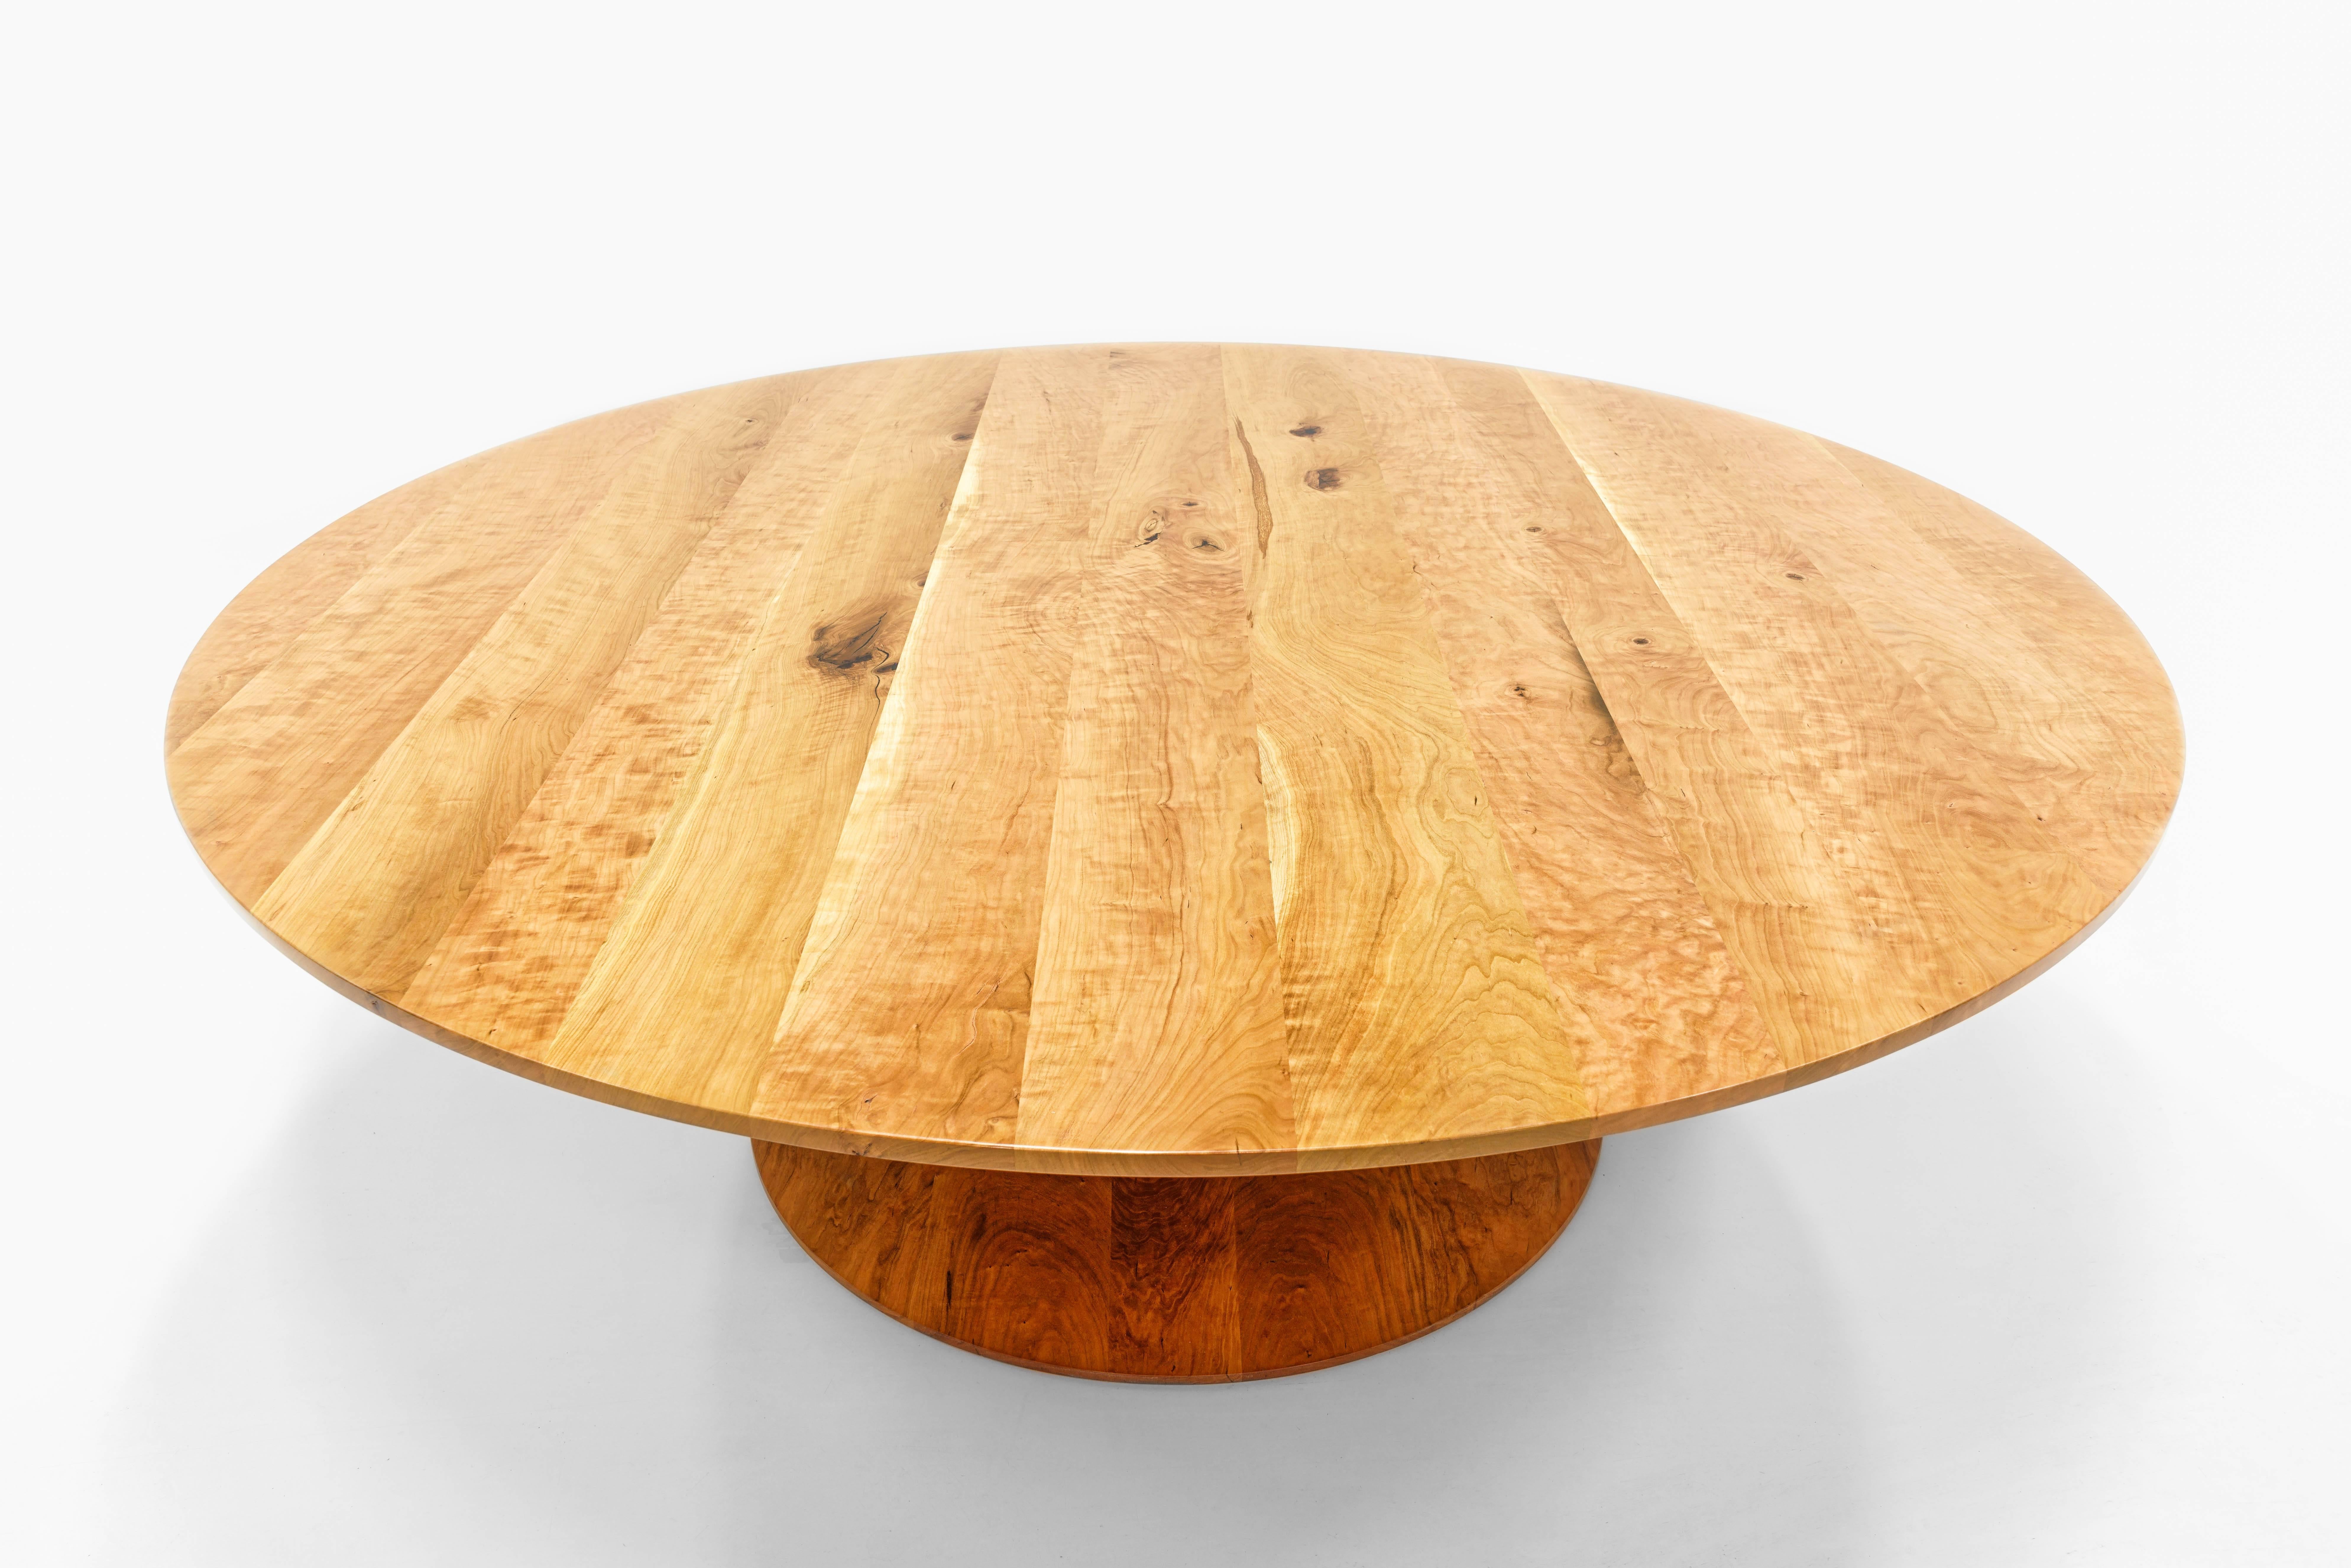 The Barolo table is a signature work by Martin Goebel and his team of craftsmen. The table shown is in cherry with an 83” diameter, but it can also be made in walnut and other hardwoods according to the desire of the client. The Barolo table evolved